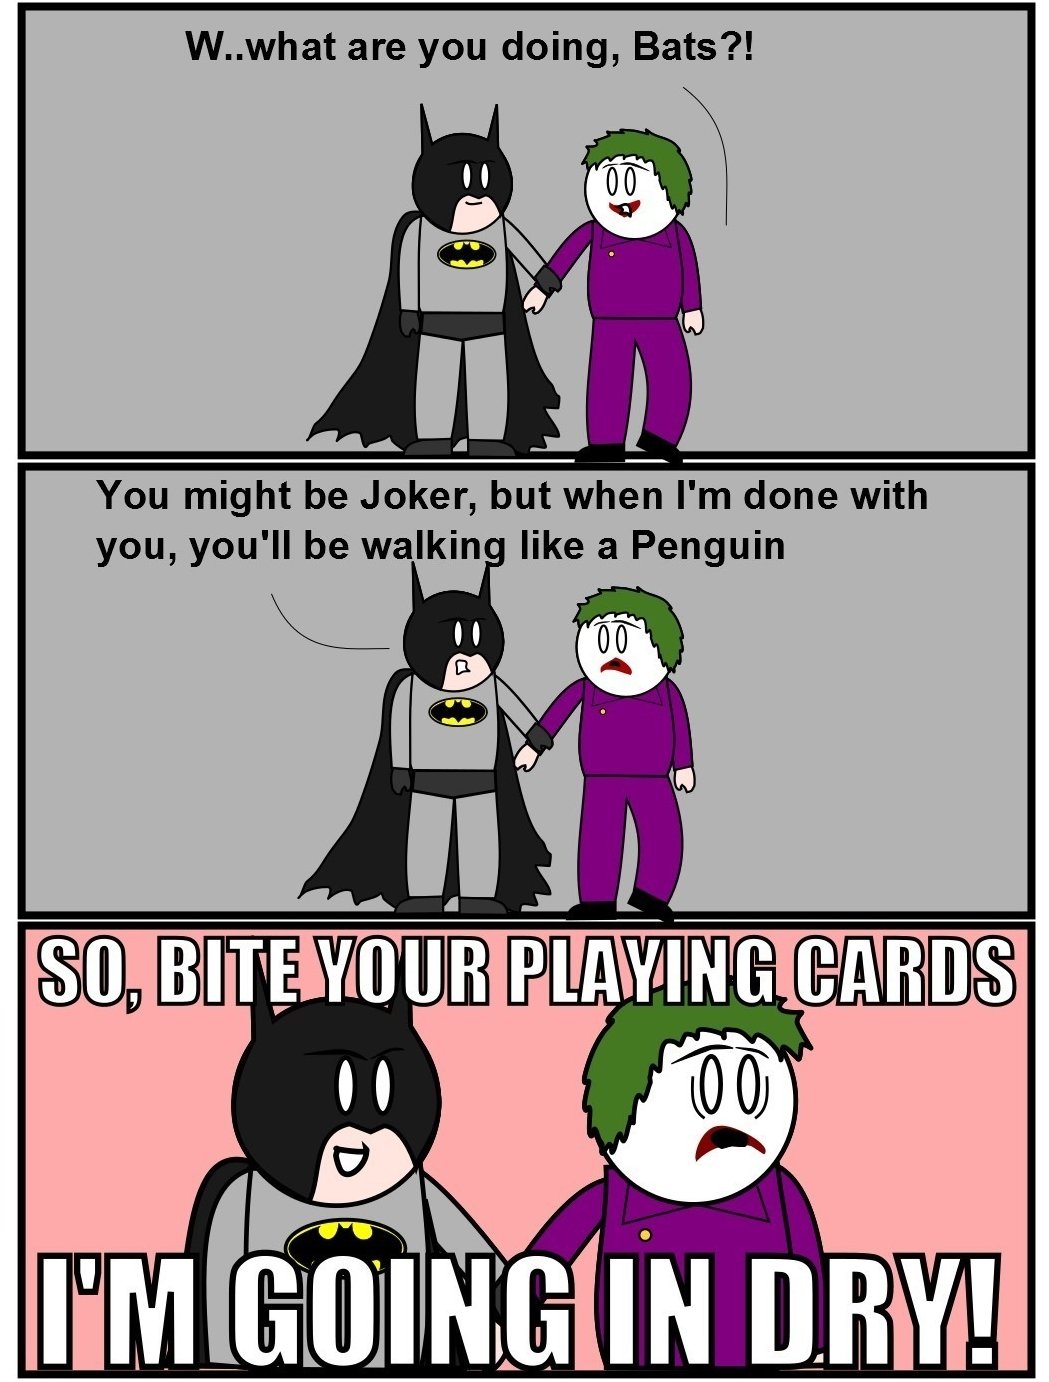 dank meme super dank memes - W..what are you doing, Bats?! You might be Joker, but when I'm done with you, you'll be walking a Penguin So, Bite Your Playing Cards Im Going In Dry!